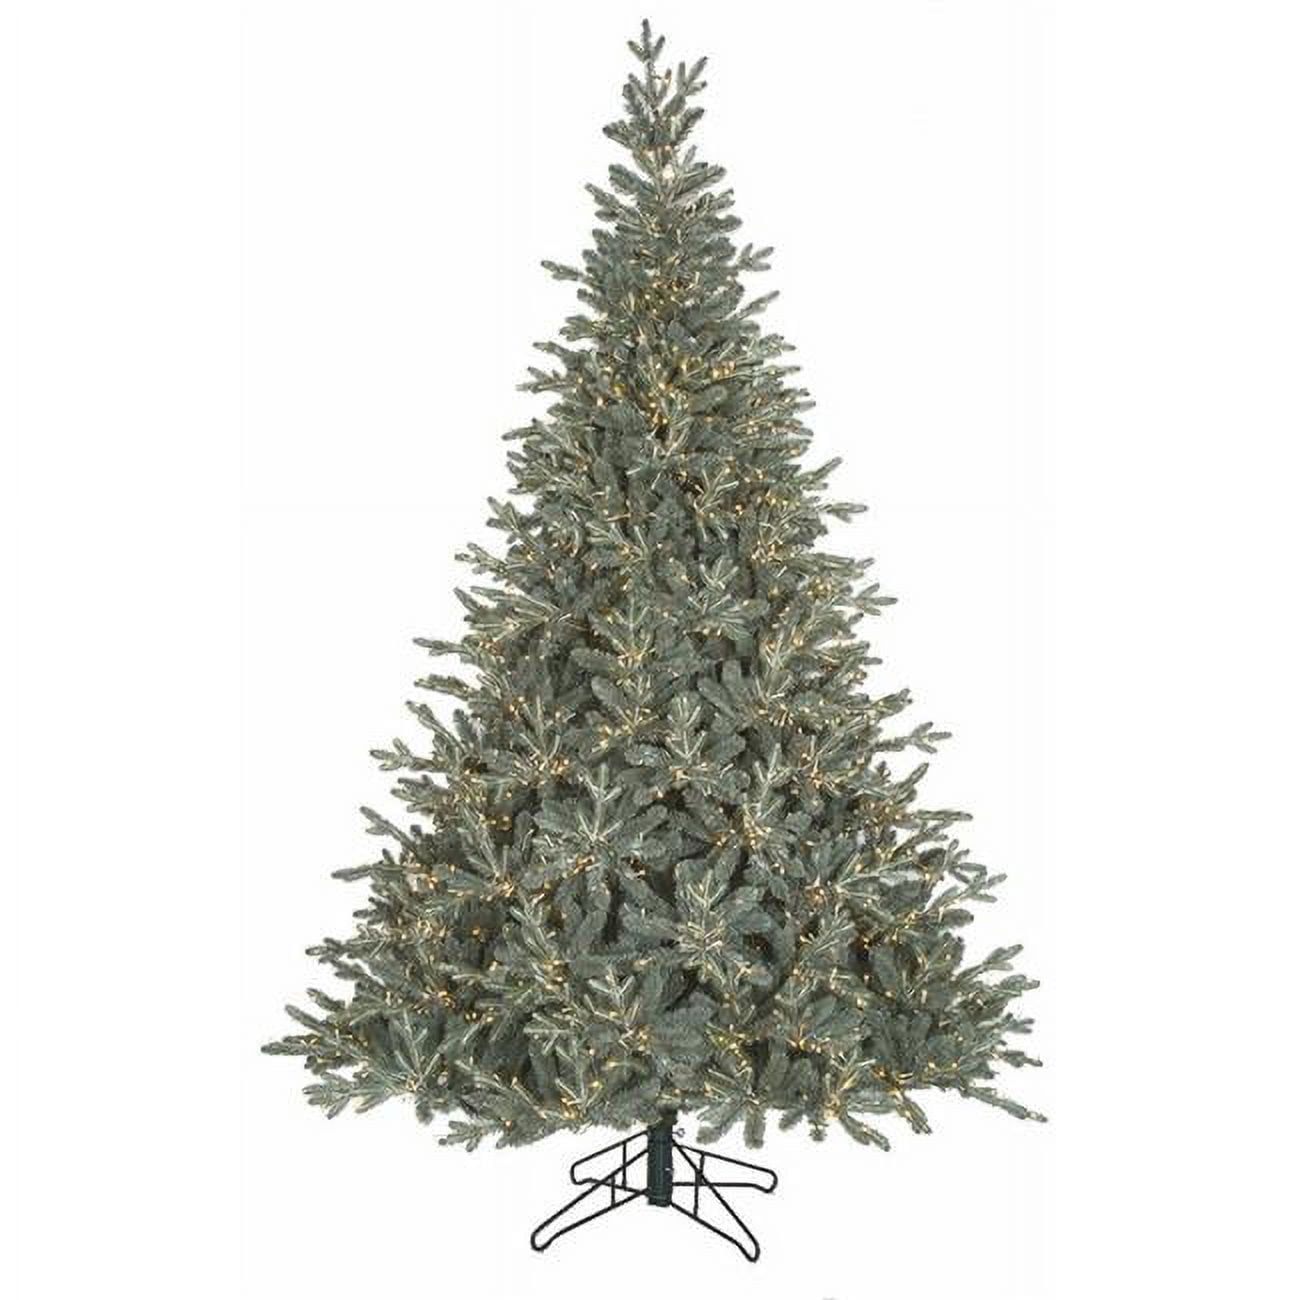 Picture of Autograph Foliages C-195044 3 ft. Appalachian Fir Potted Tree with Twinkling LED Lights, Light Blue